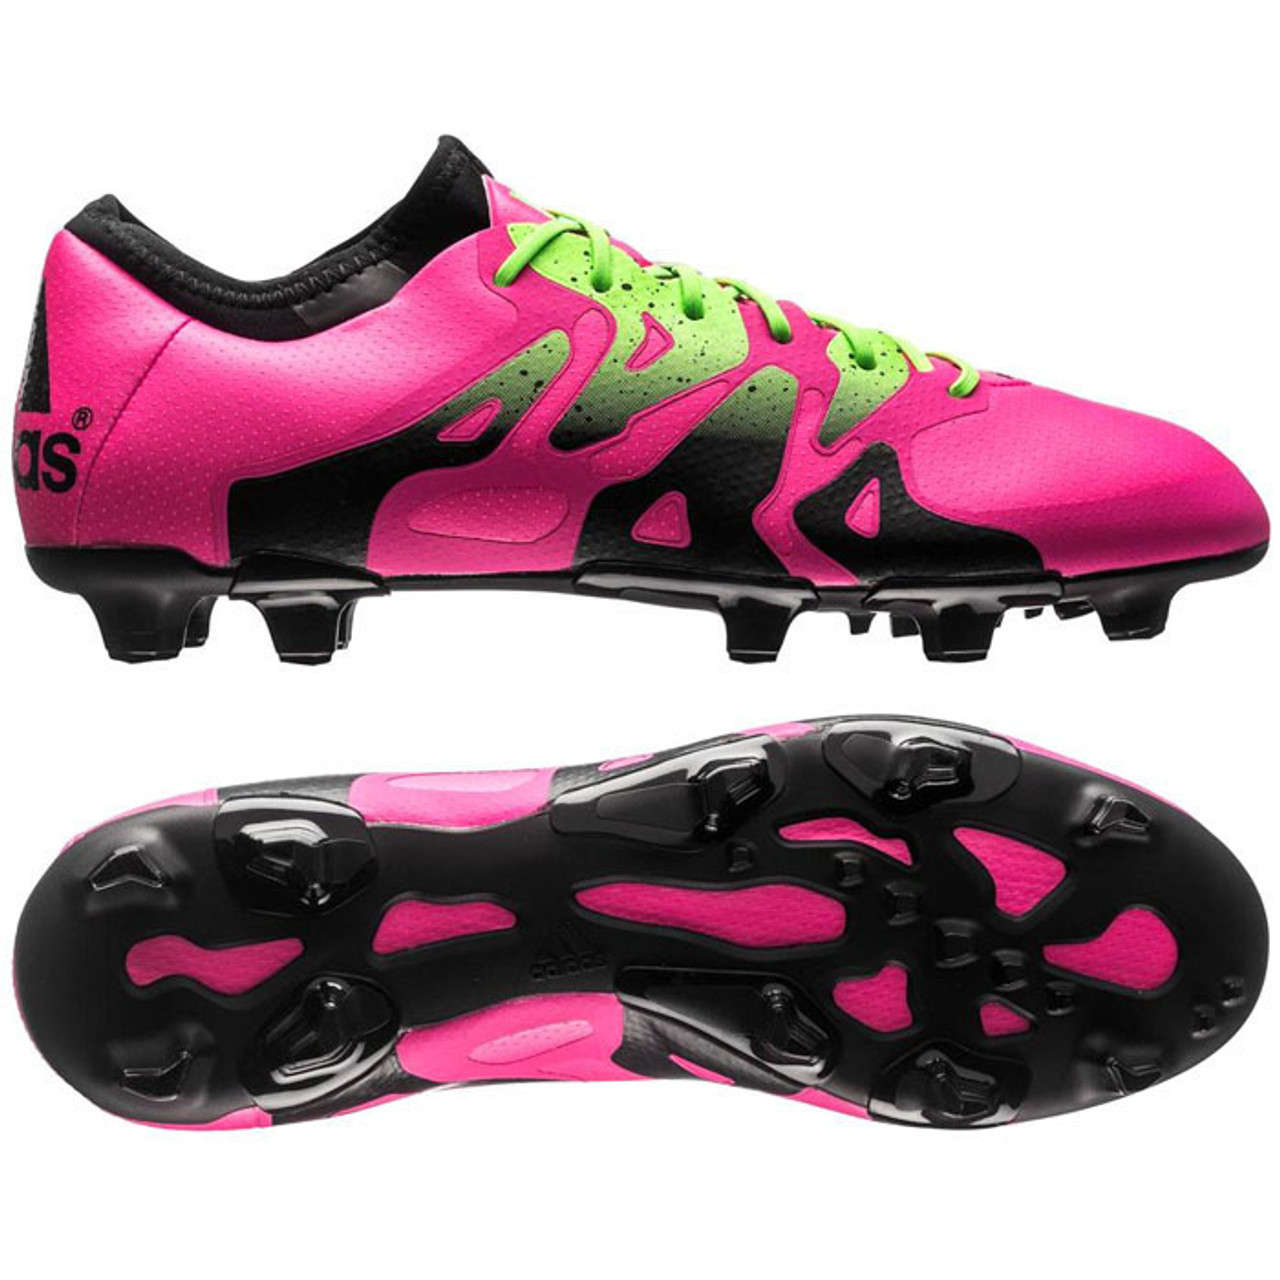 ADIDAS X 15.1 FG/AG firm ground soccer cleats shock pink